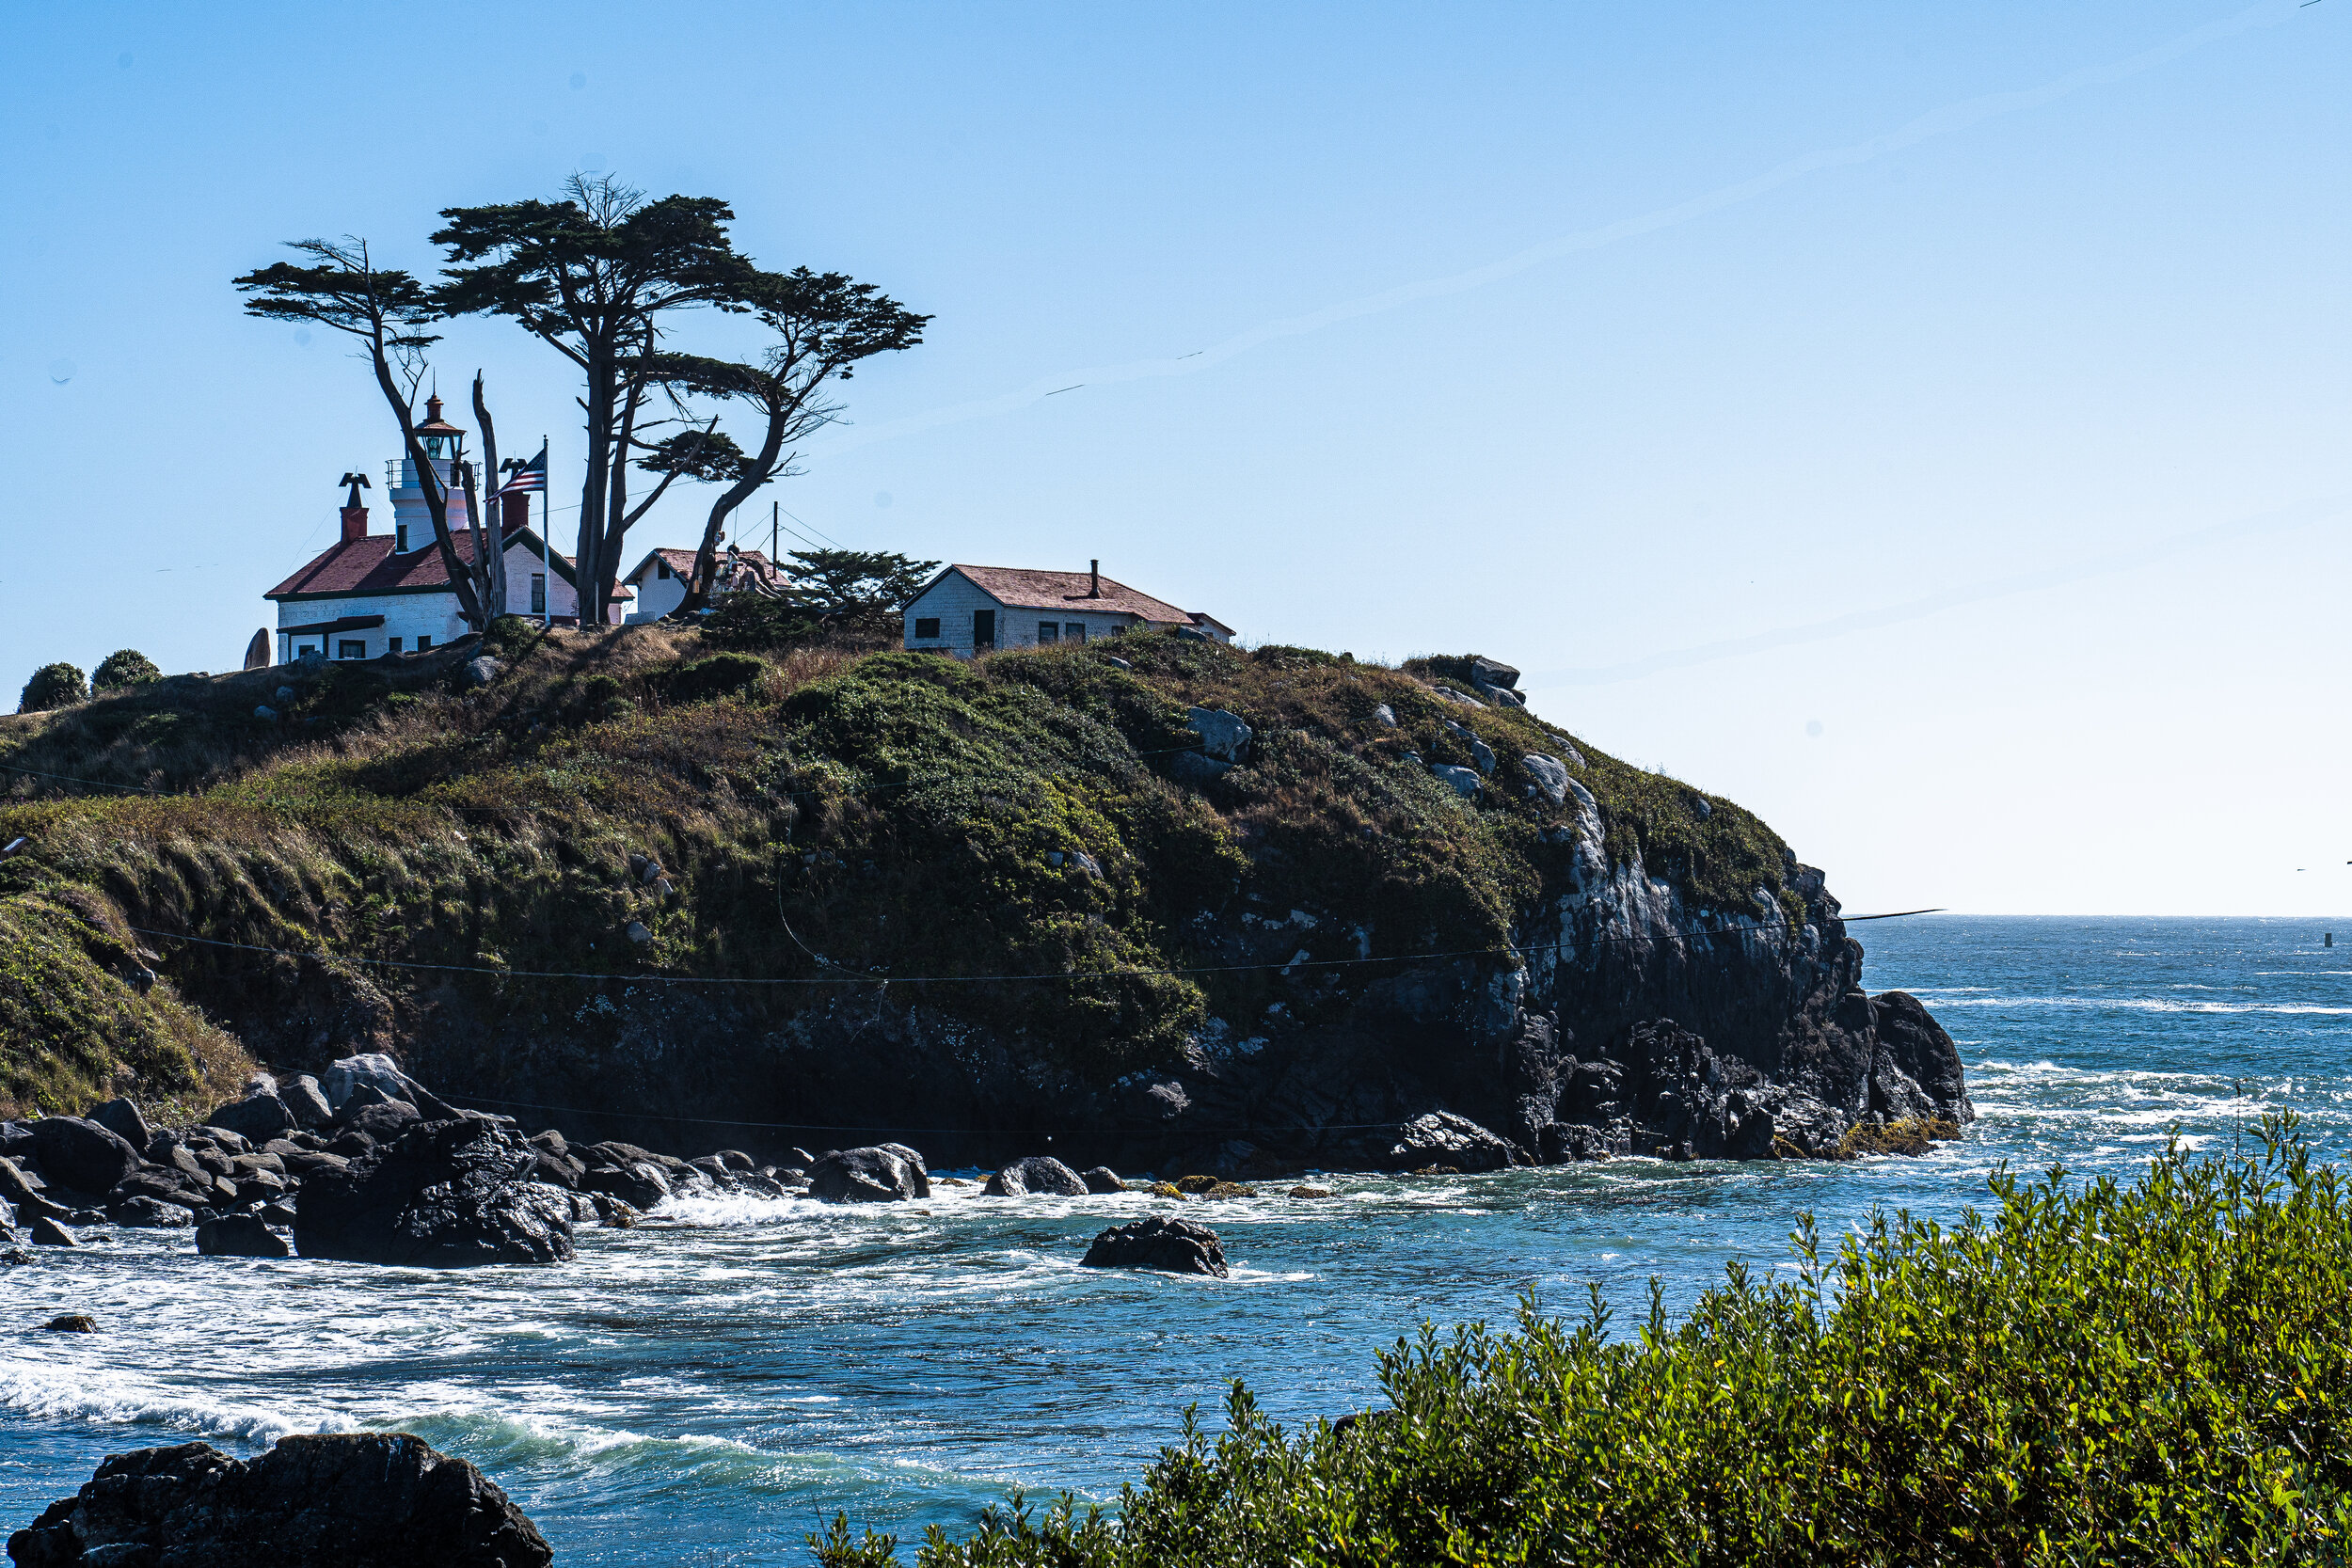  Constructed in 1855,  Battery Point Lighthouse  in  Crescent City  is one of the oldest lighthouses in California.  